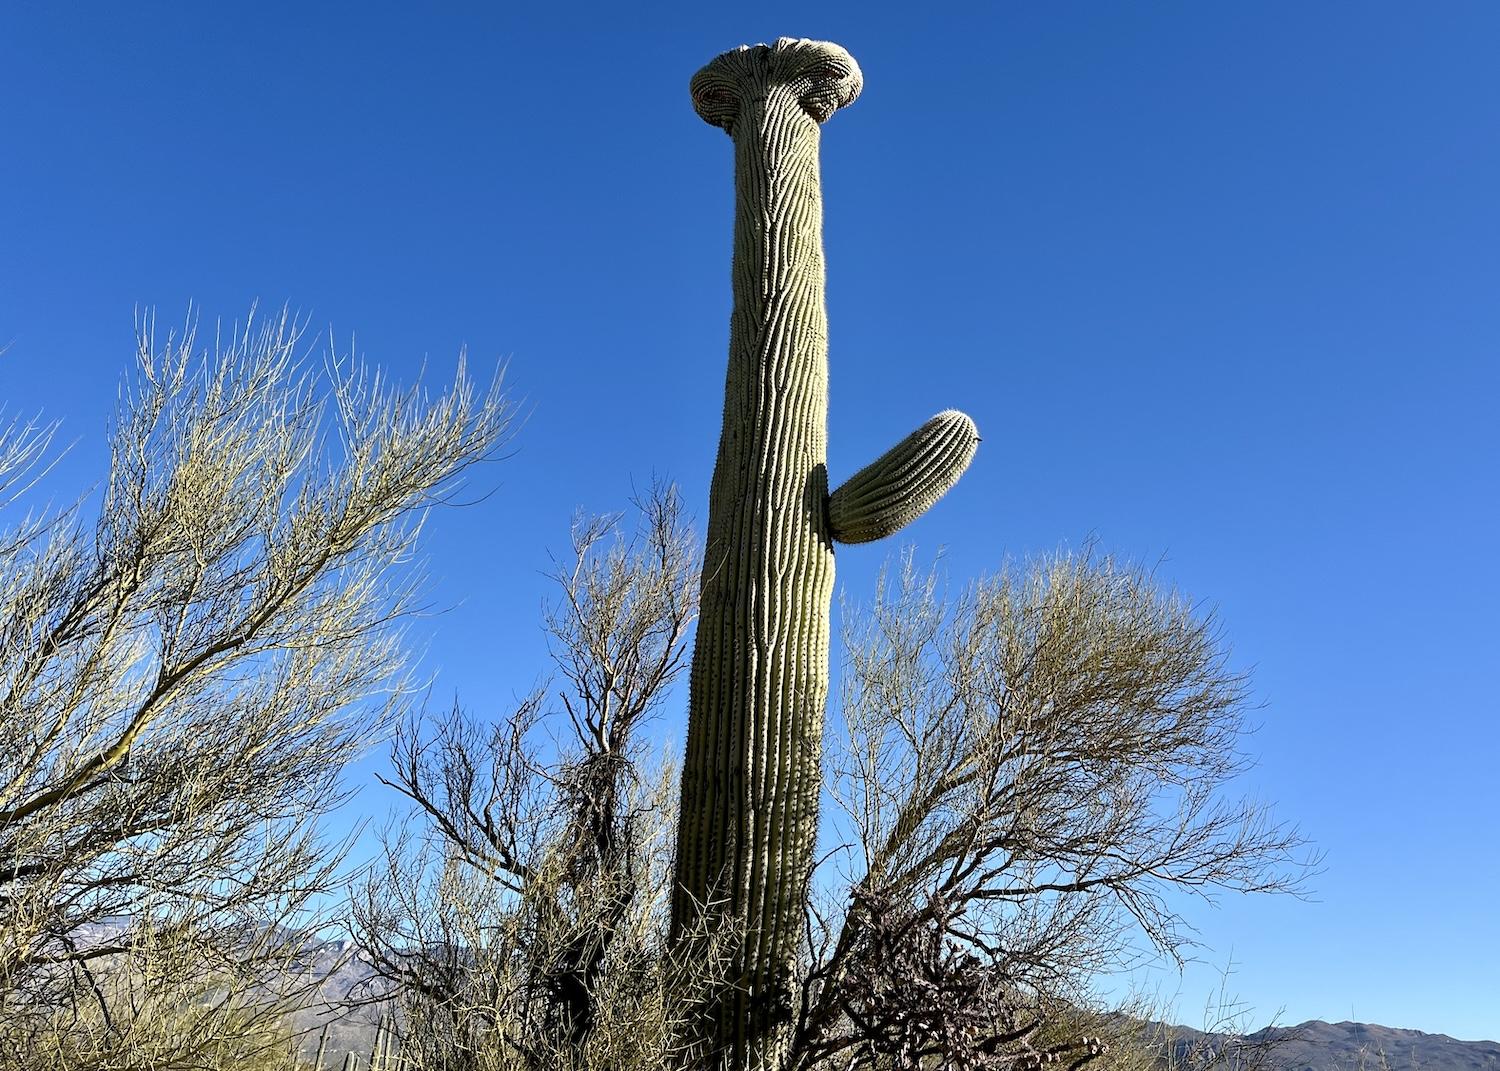 A crested (cristate) saguaro in Saguaro National Park's east district looks like ET.